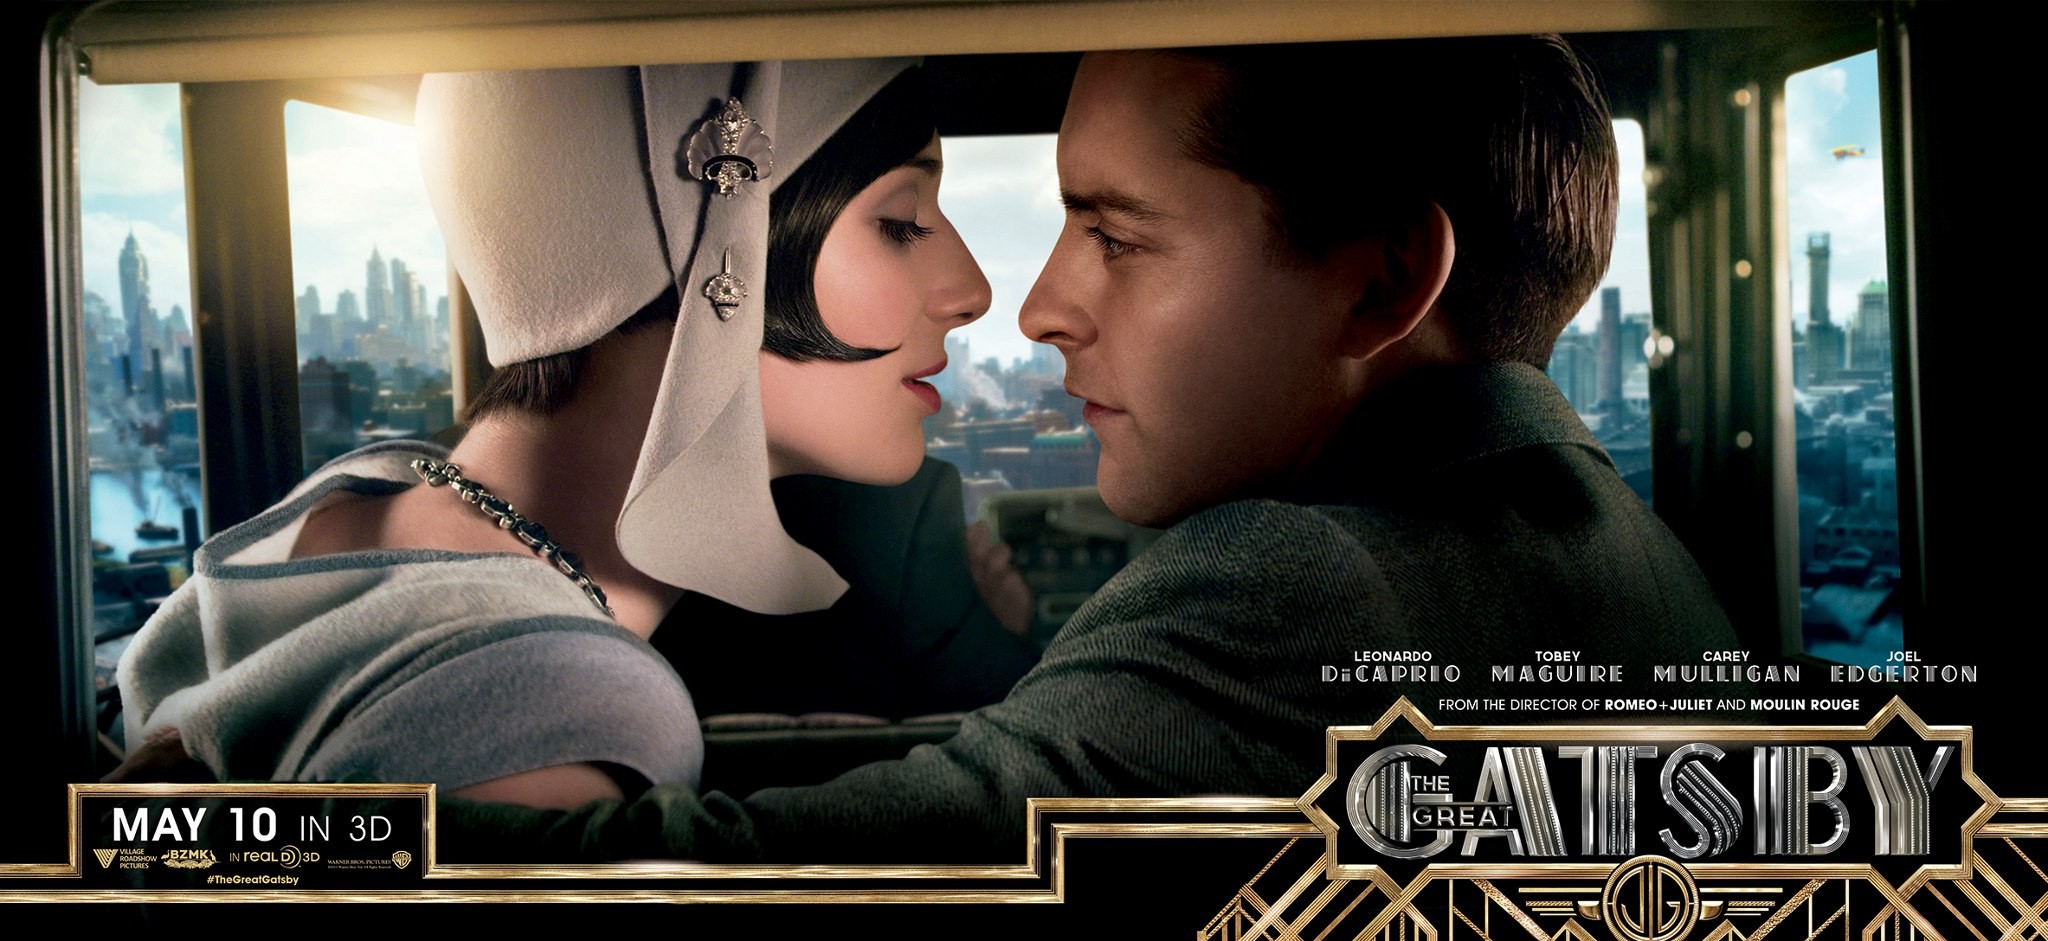 Mega Sized Movie Poster Image for The Great Gatsby (#20 of 24)